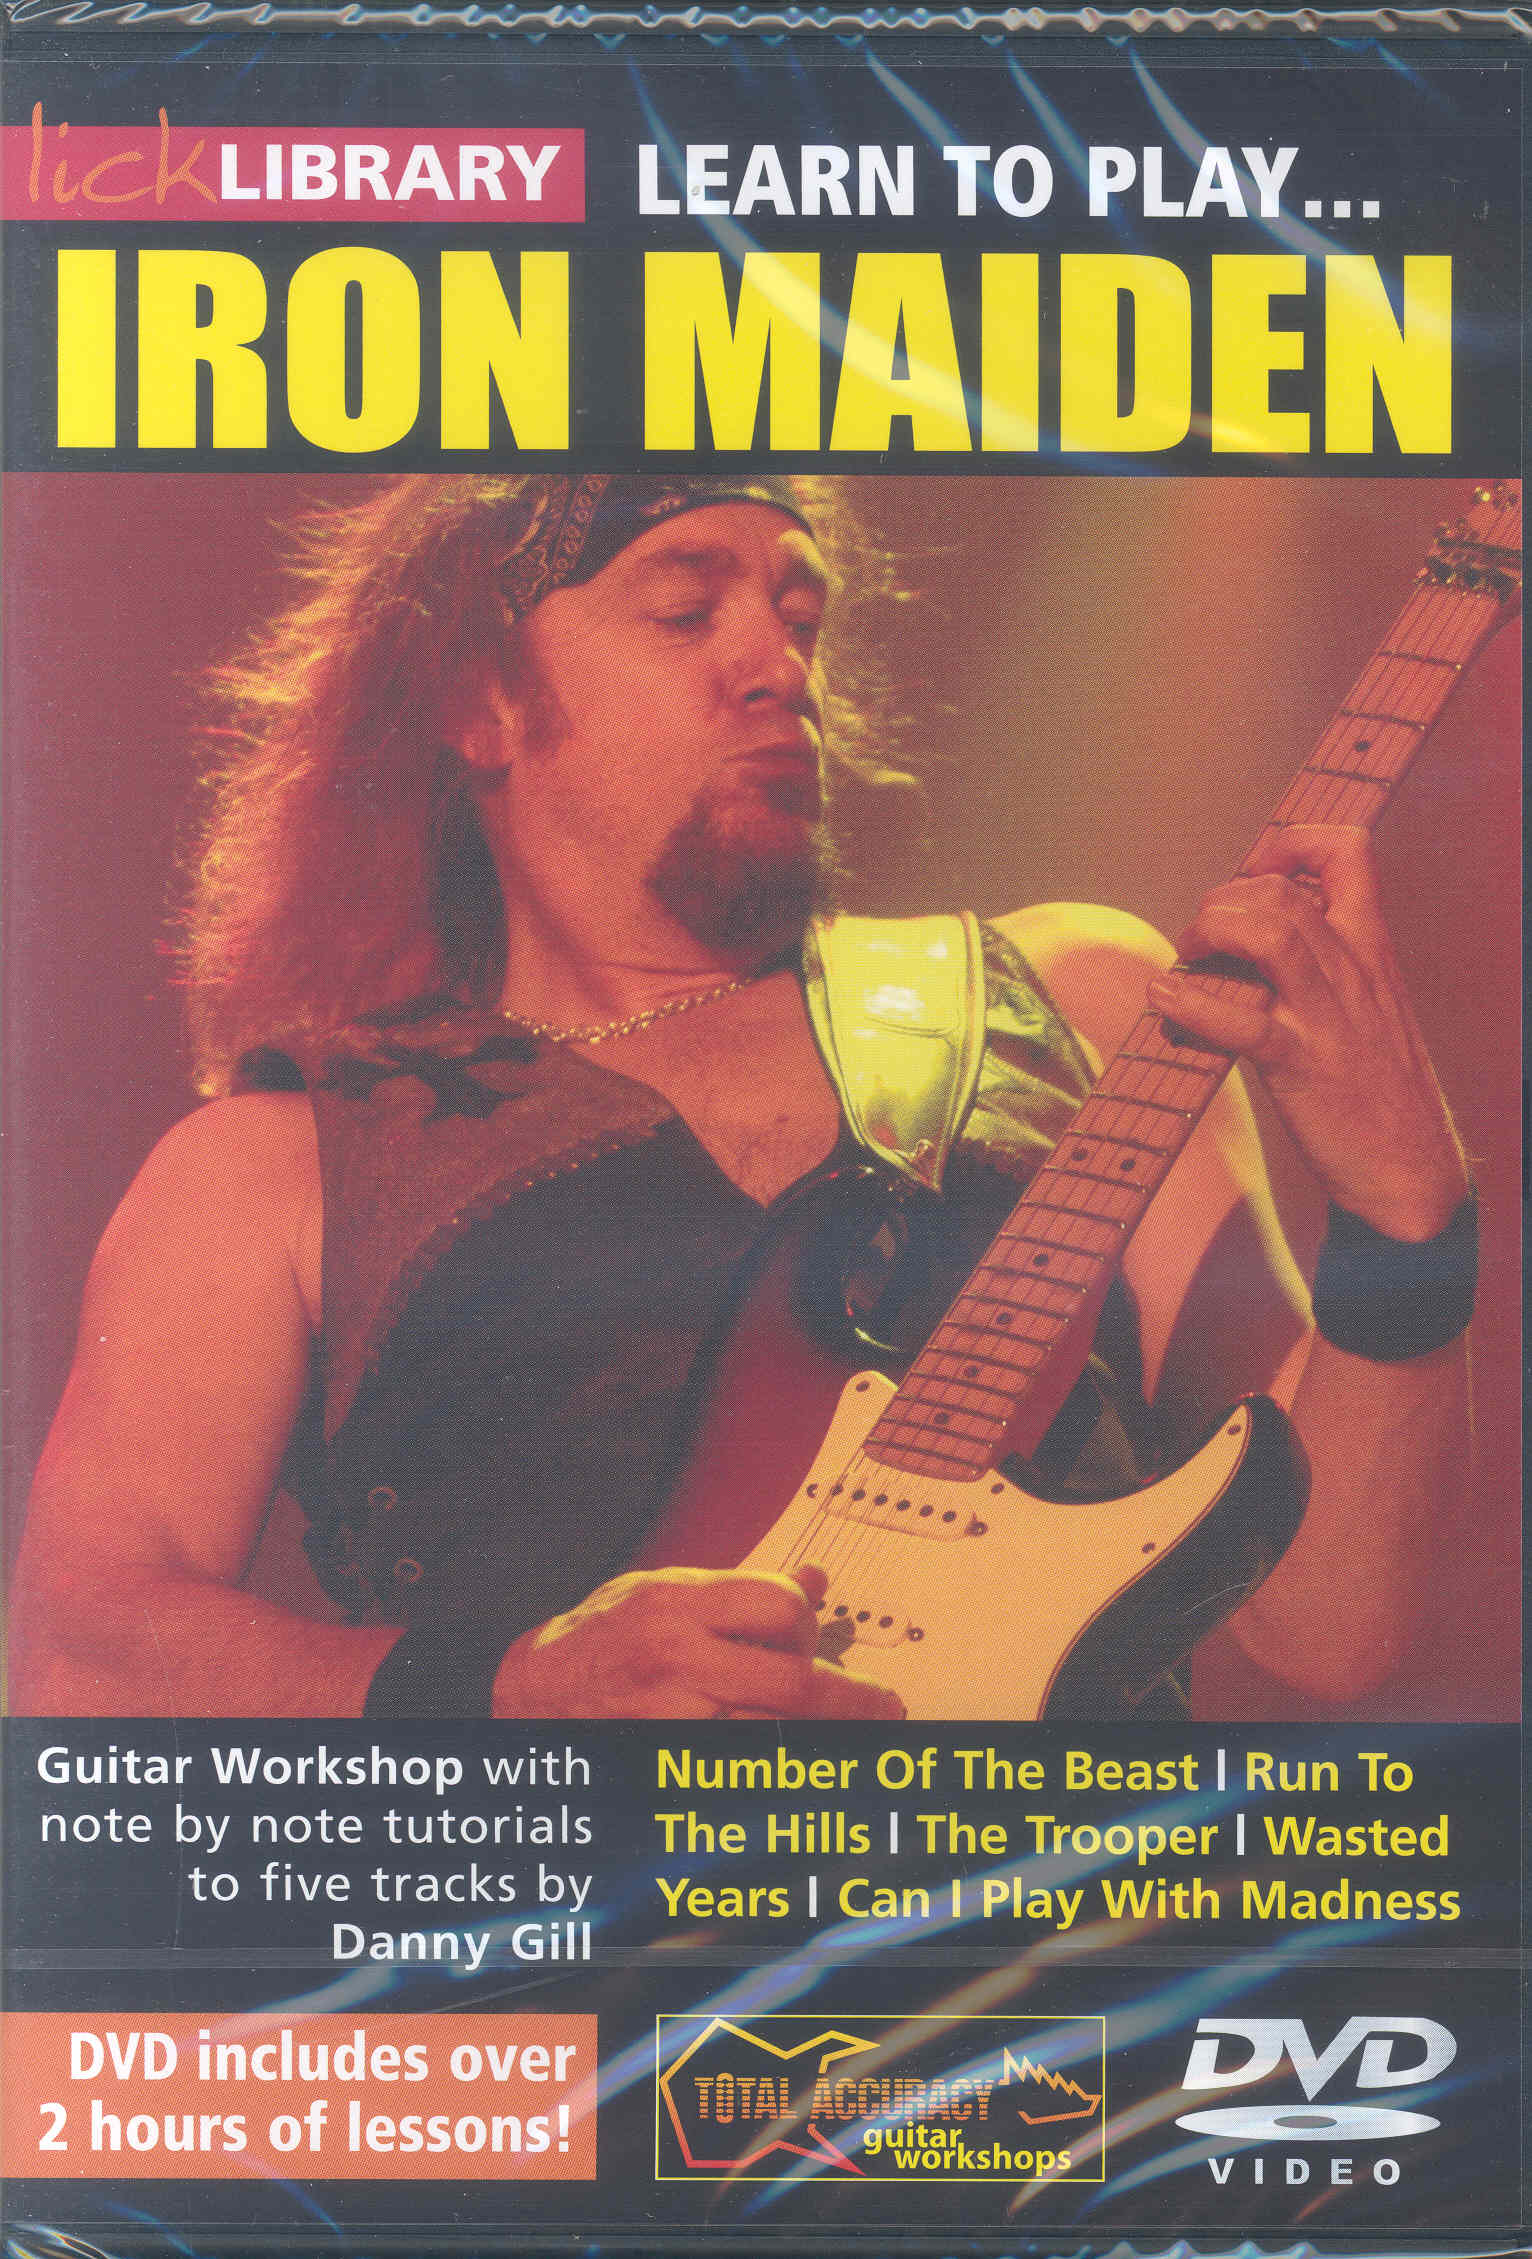 Iron Maiden Learn To Play Lick Library Dvd Sheet Music Songbook